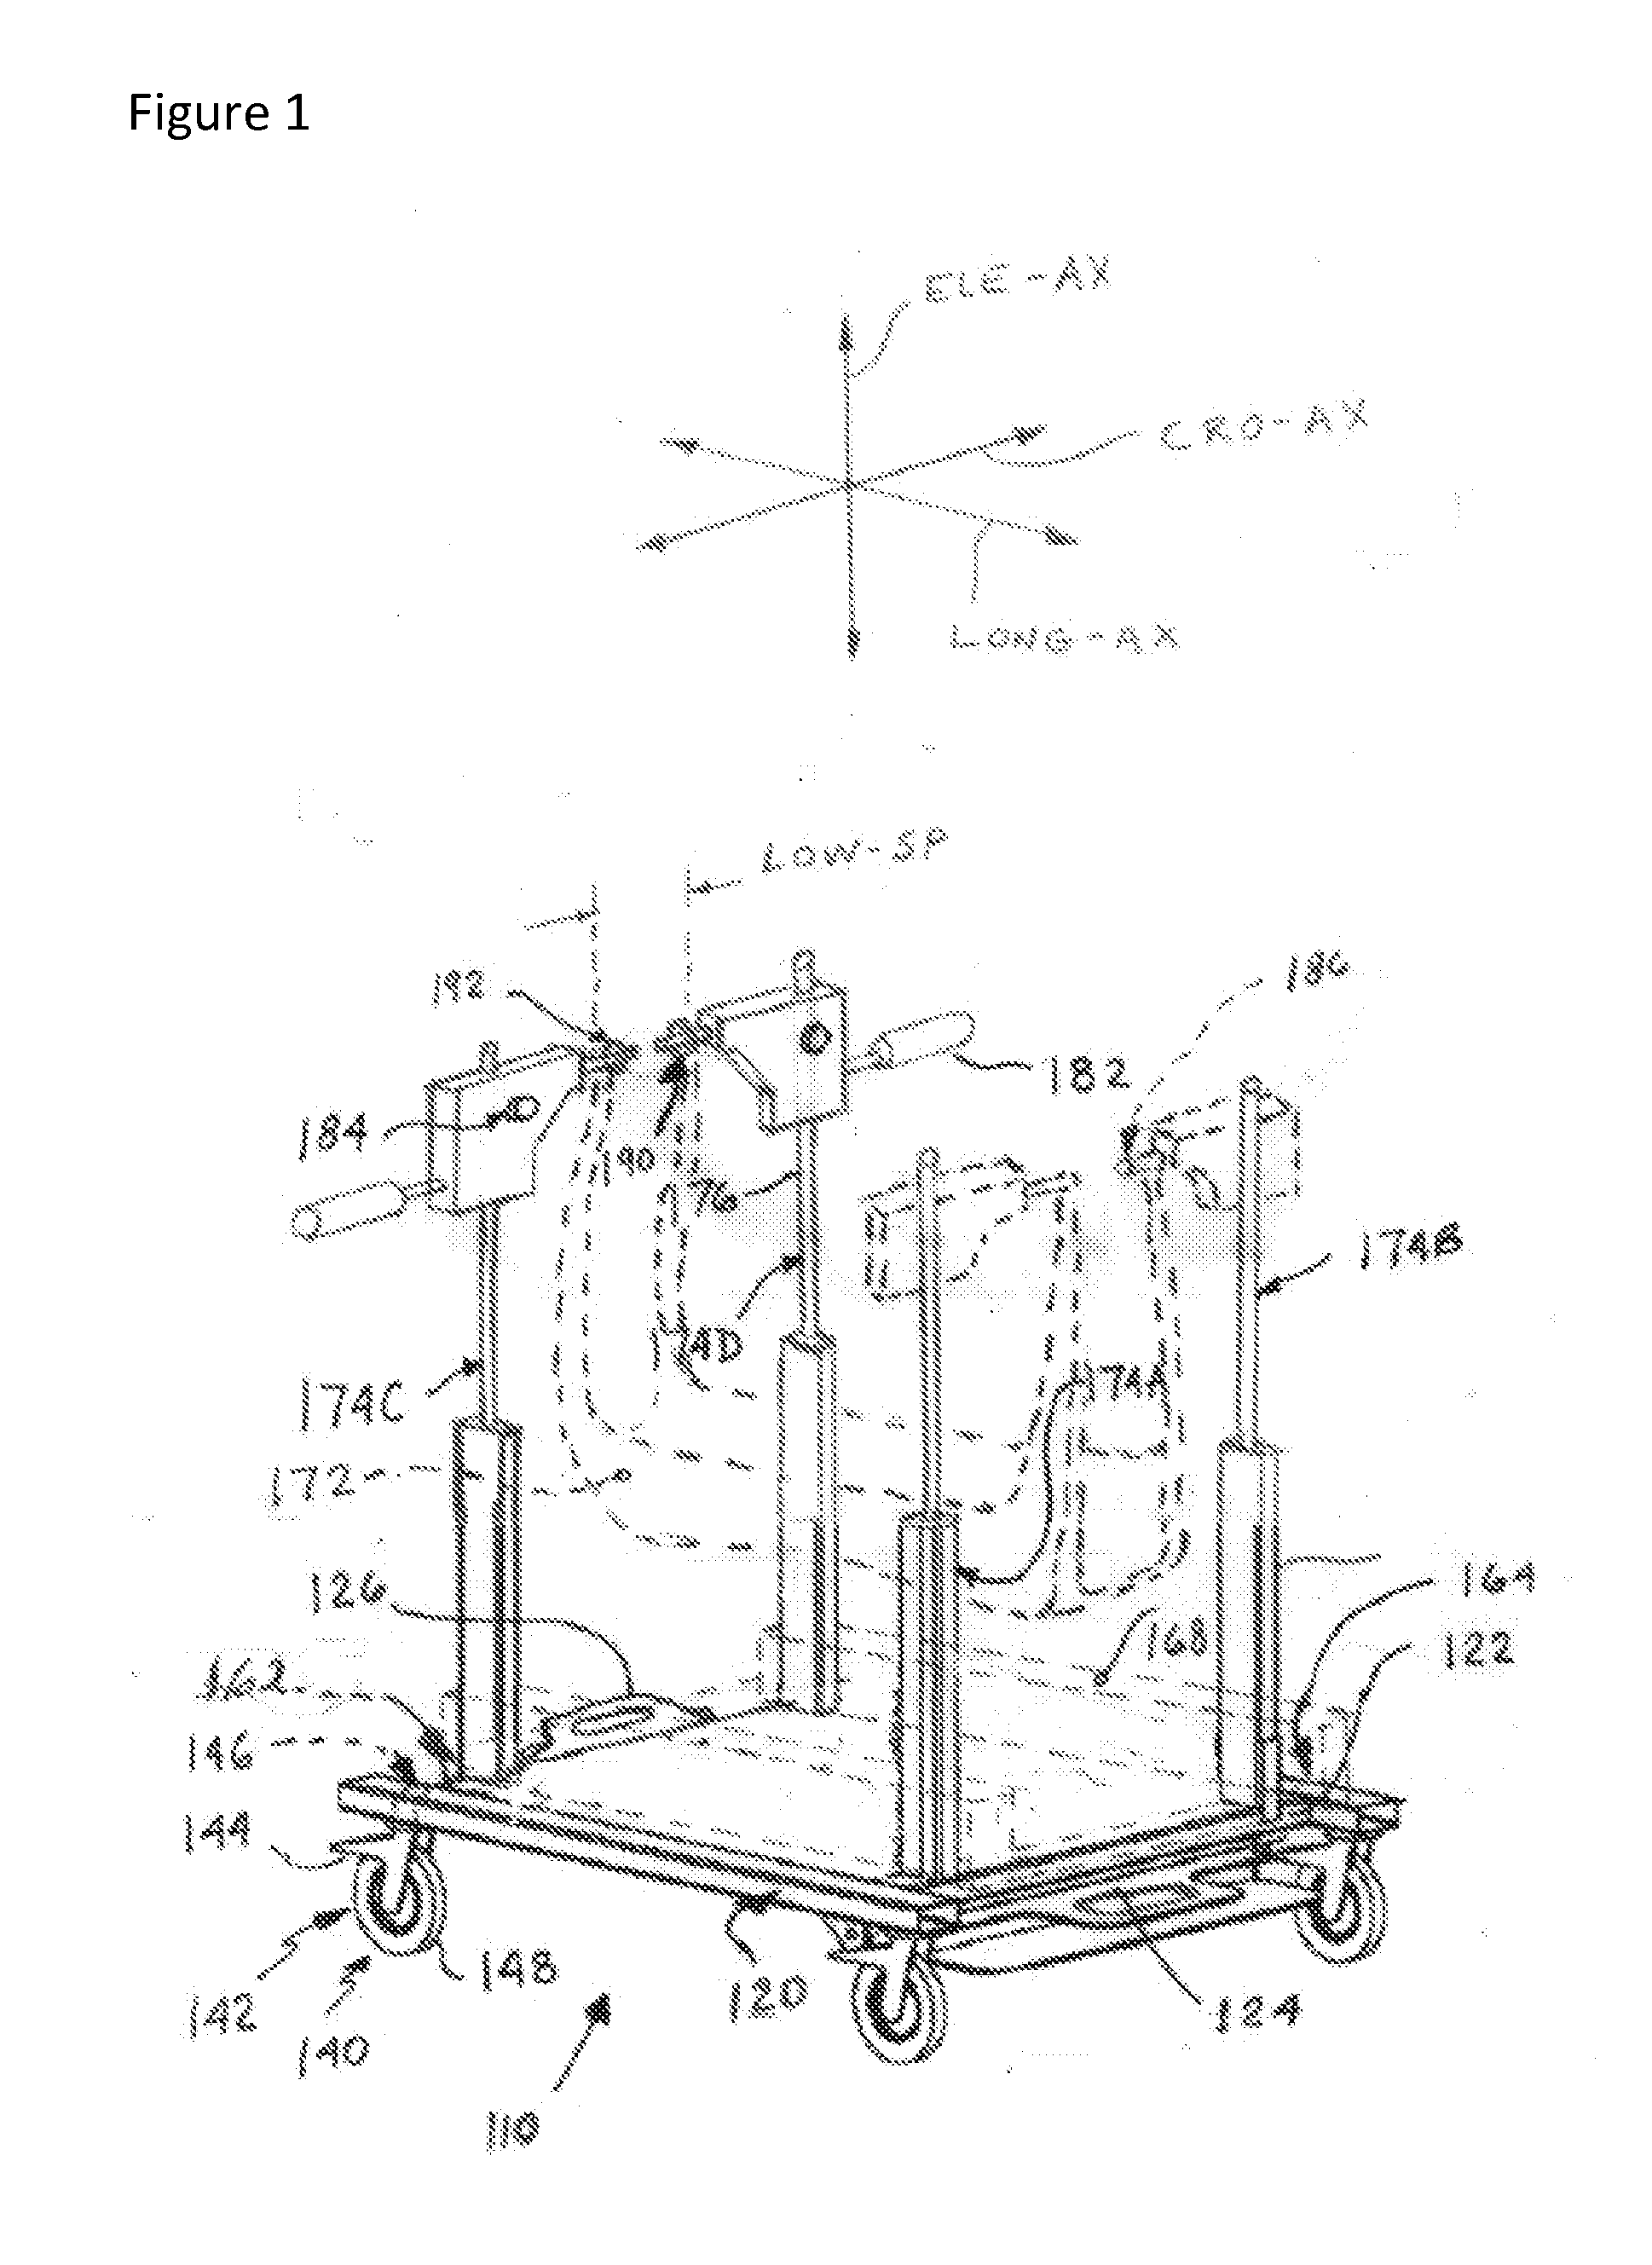 Pet lift device with a transport mode and a stationary location mode